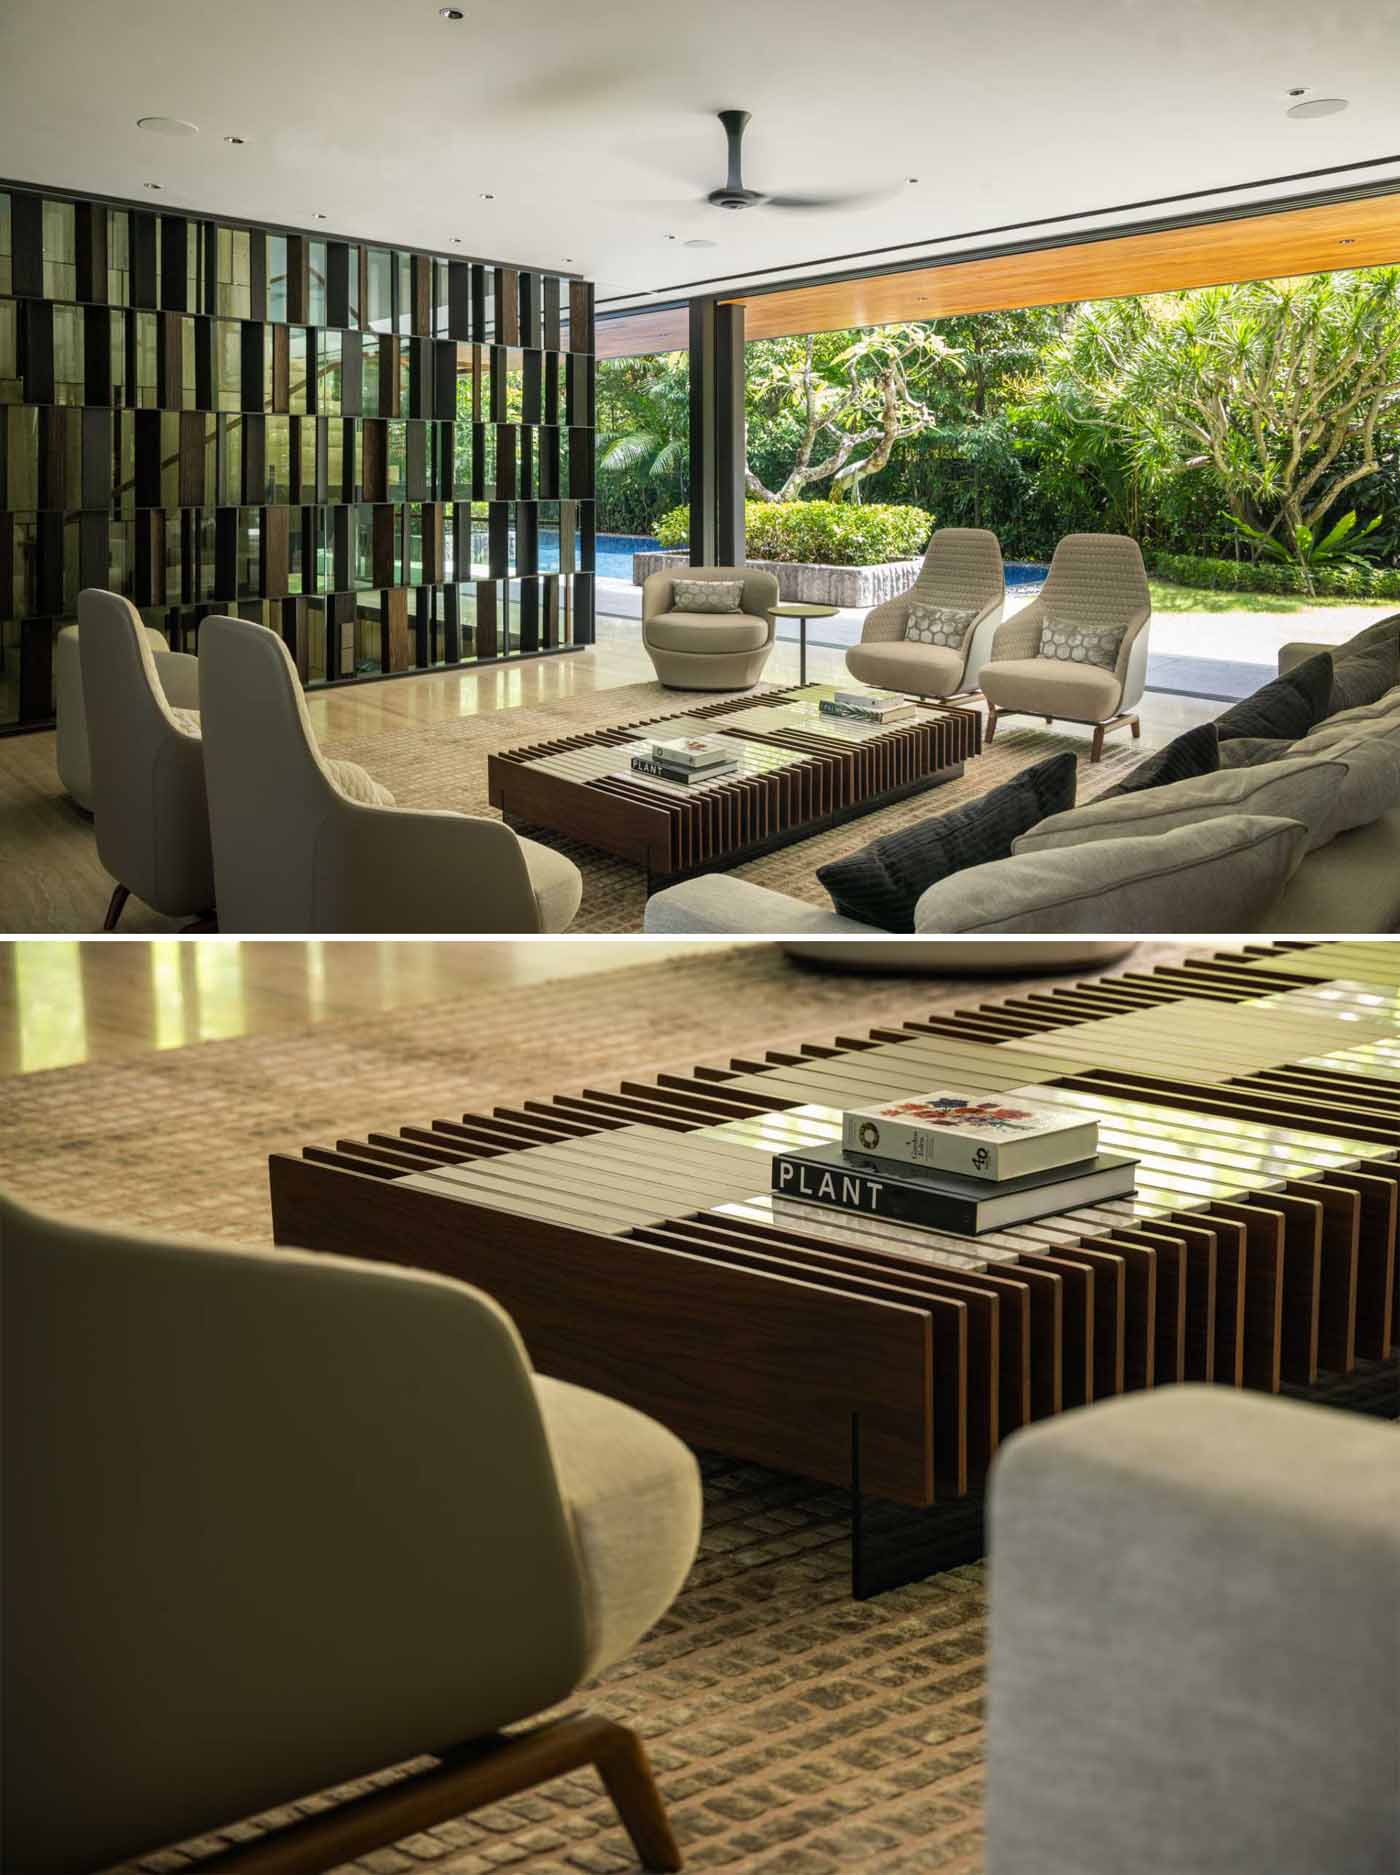 A modern living room has gl، walls that open to the outdoors.